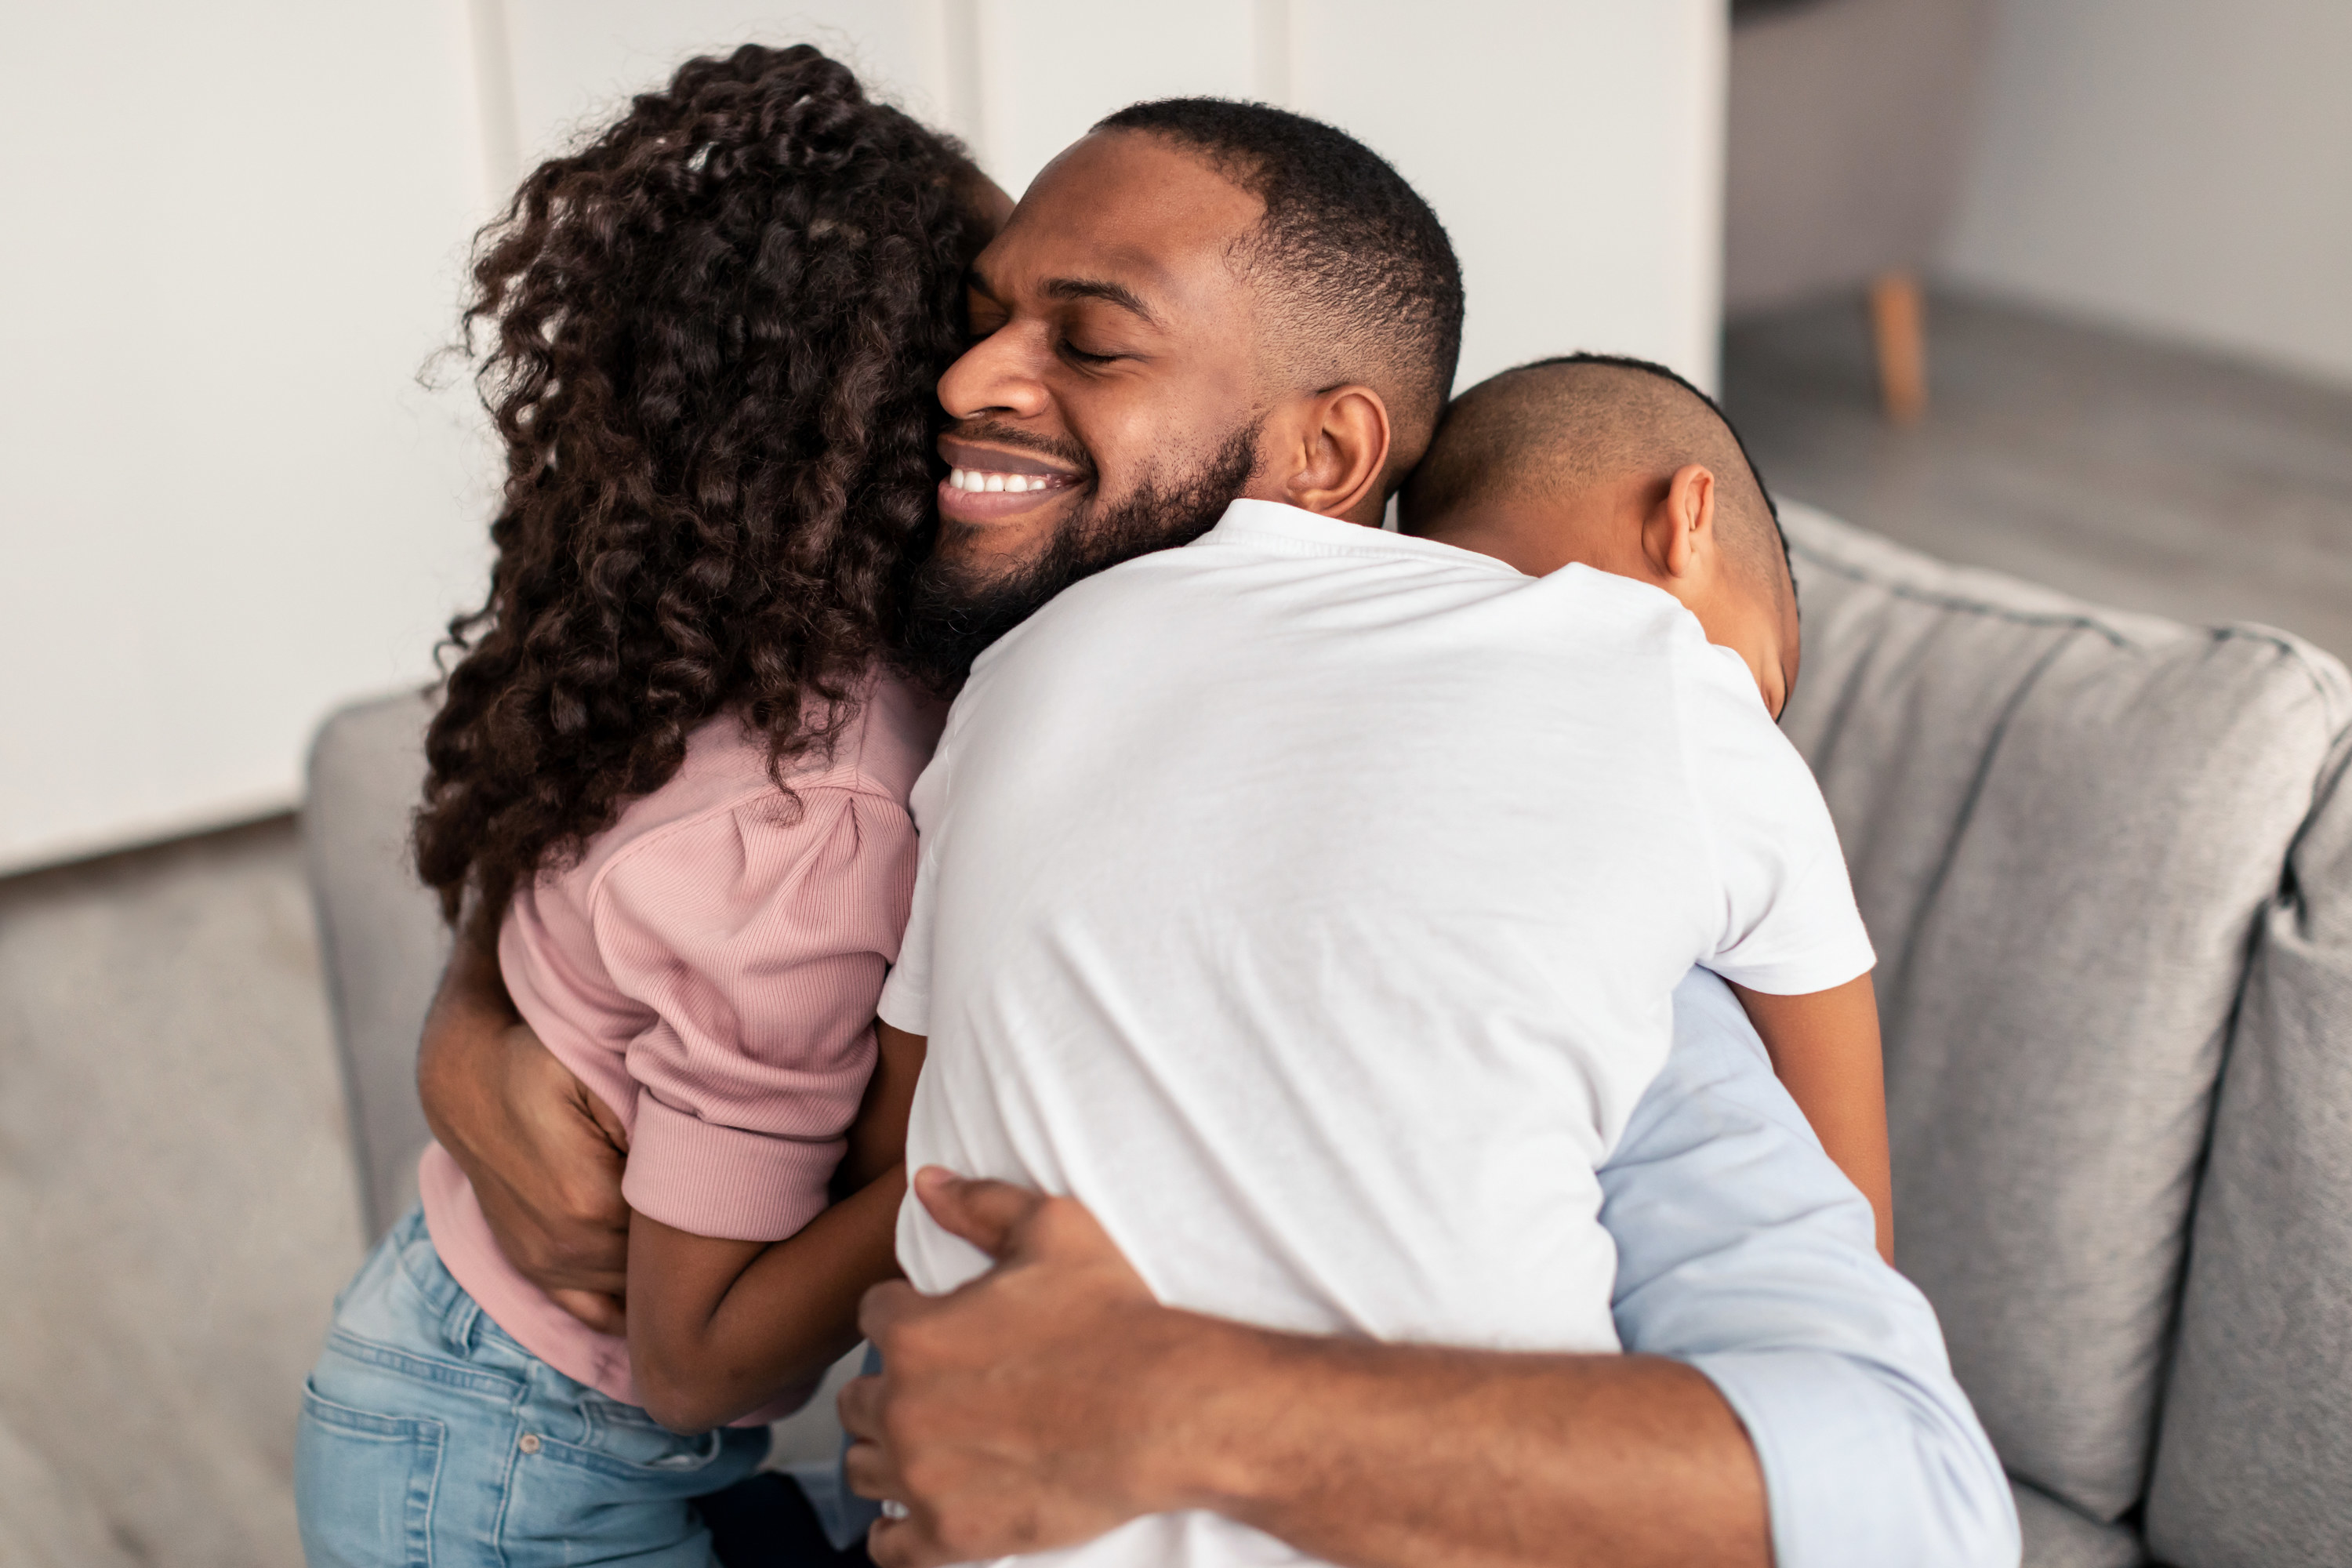 Happy Loving Family. Portrait of cheerful smiling African American dad embracing his little children, expressing love. Girl, boy and man hugging, enjoying time together, celebrating Father&#x27;s day